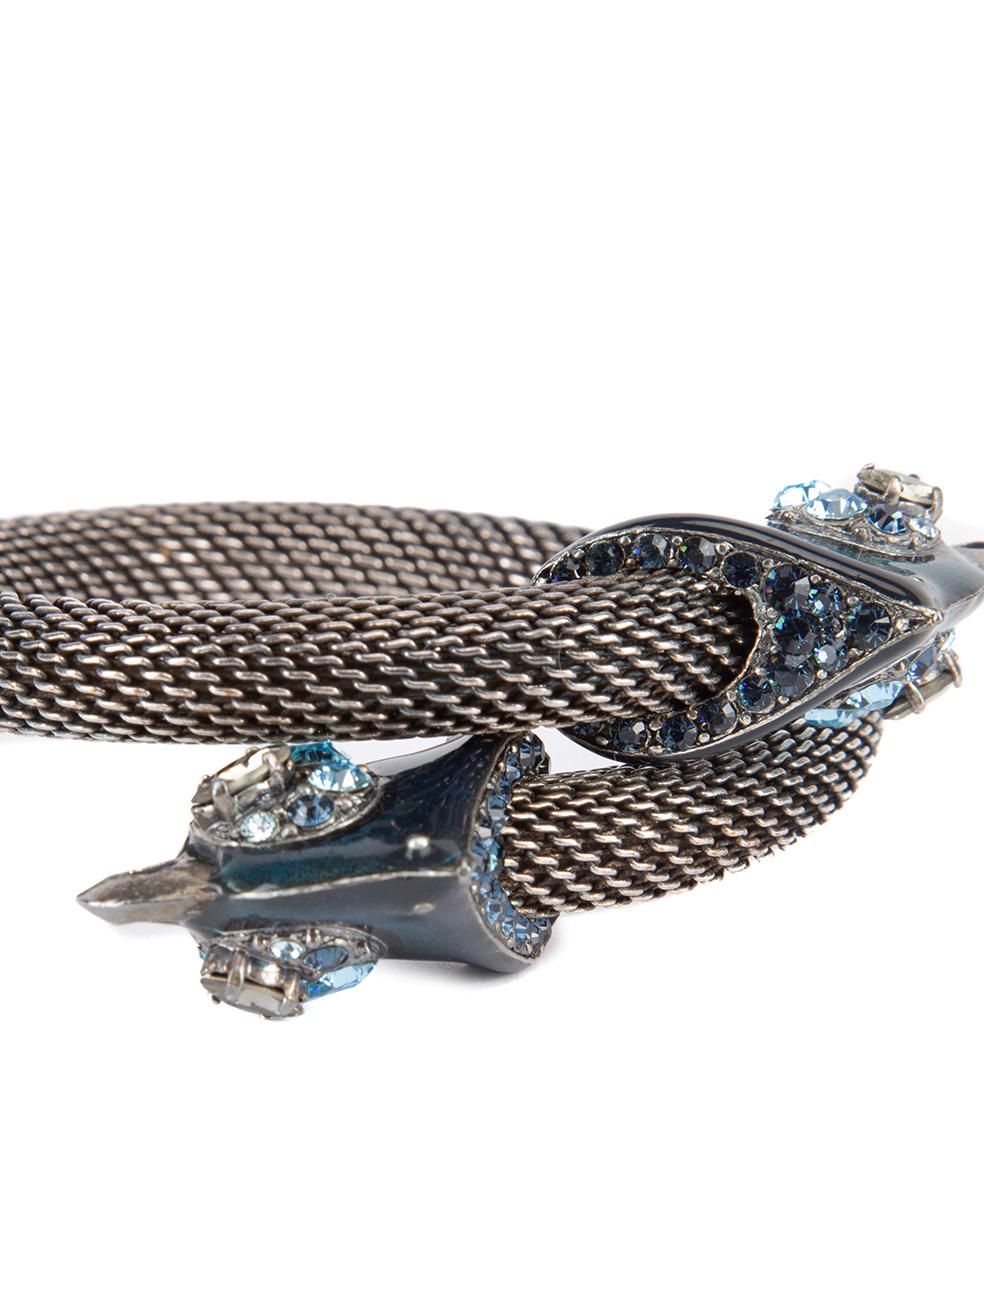 CONDITION is Very good. Minimal wear to bangle is evident. Minimal scuffs seen to the bird beak at the end of the bangle on this used Lanvin designer resale item. This item includes the original dust bag and jewellery box. Details Blue Metal Bird